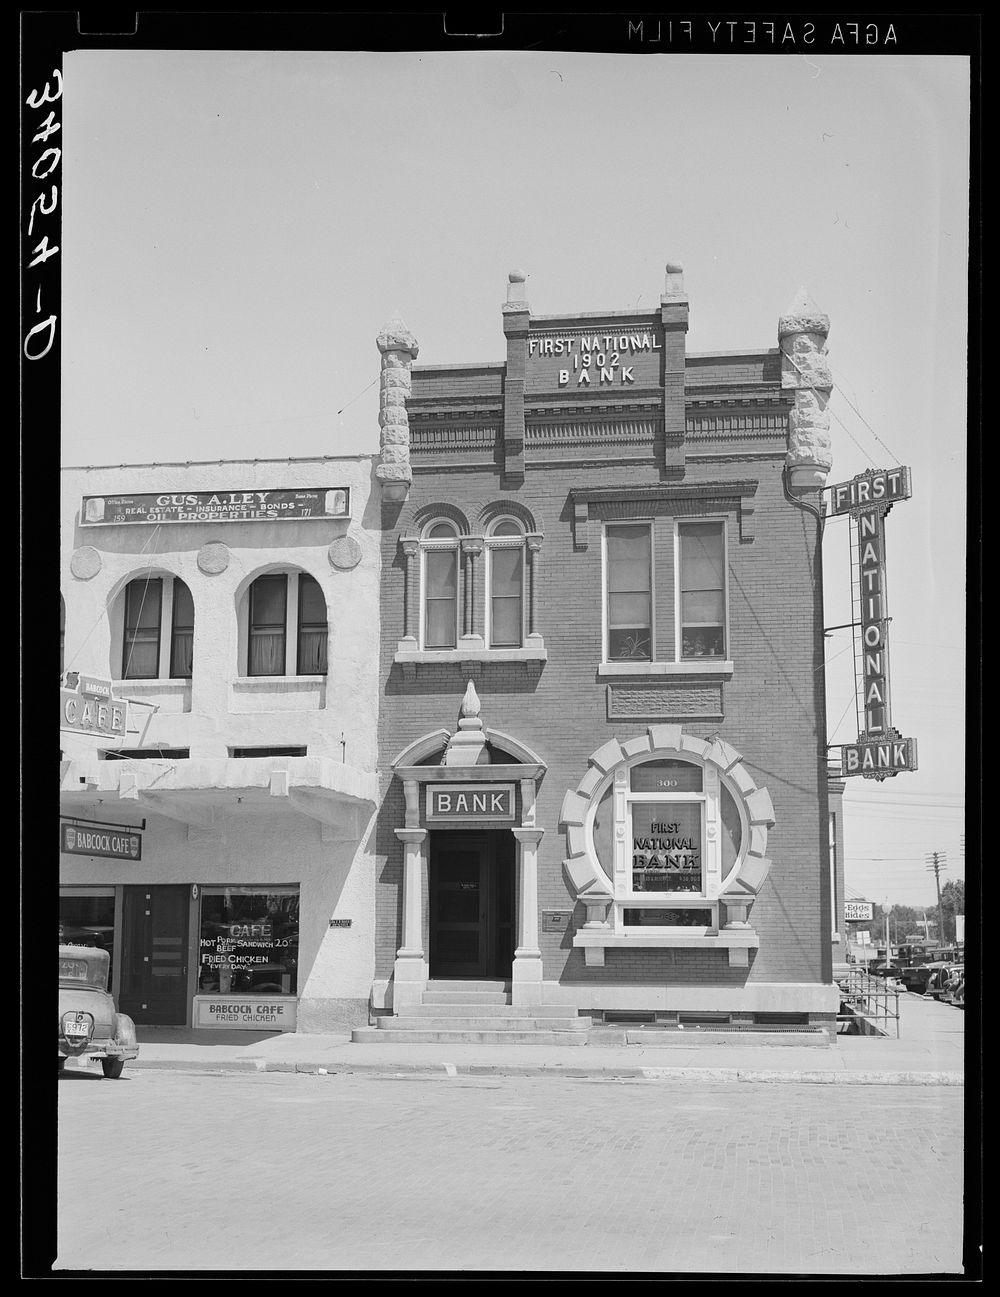 Bank. Perry, Oklahoma by Russell Lee